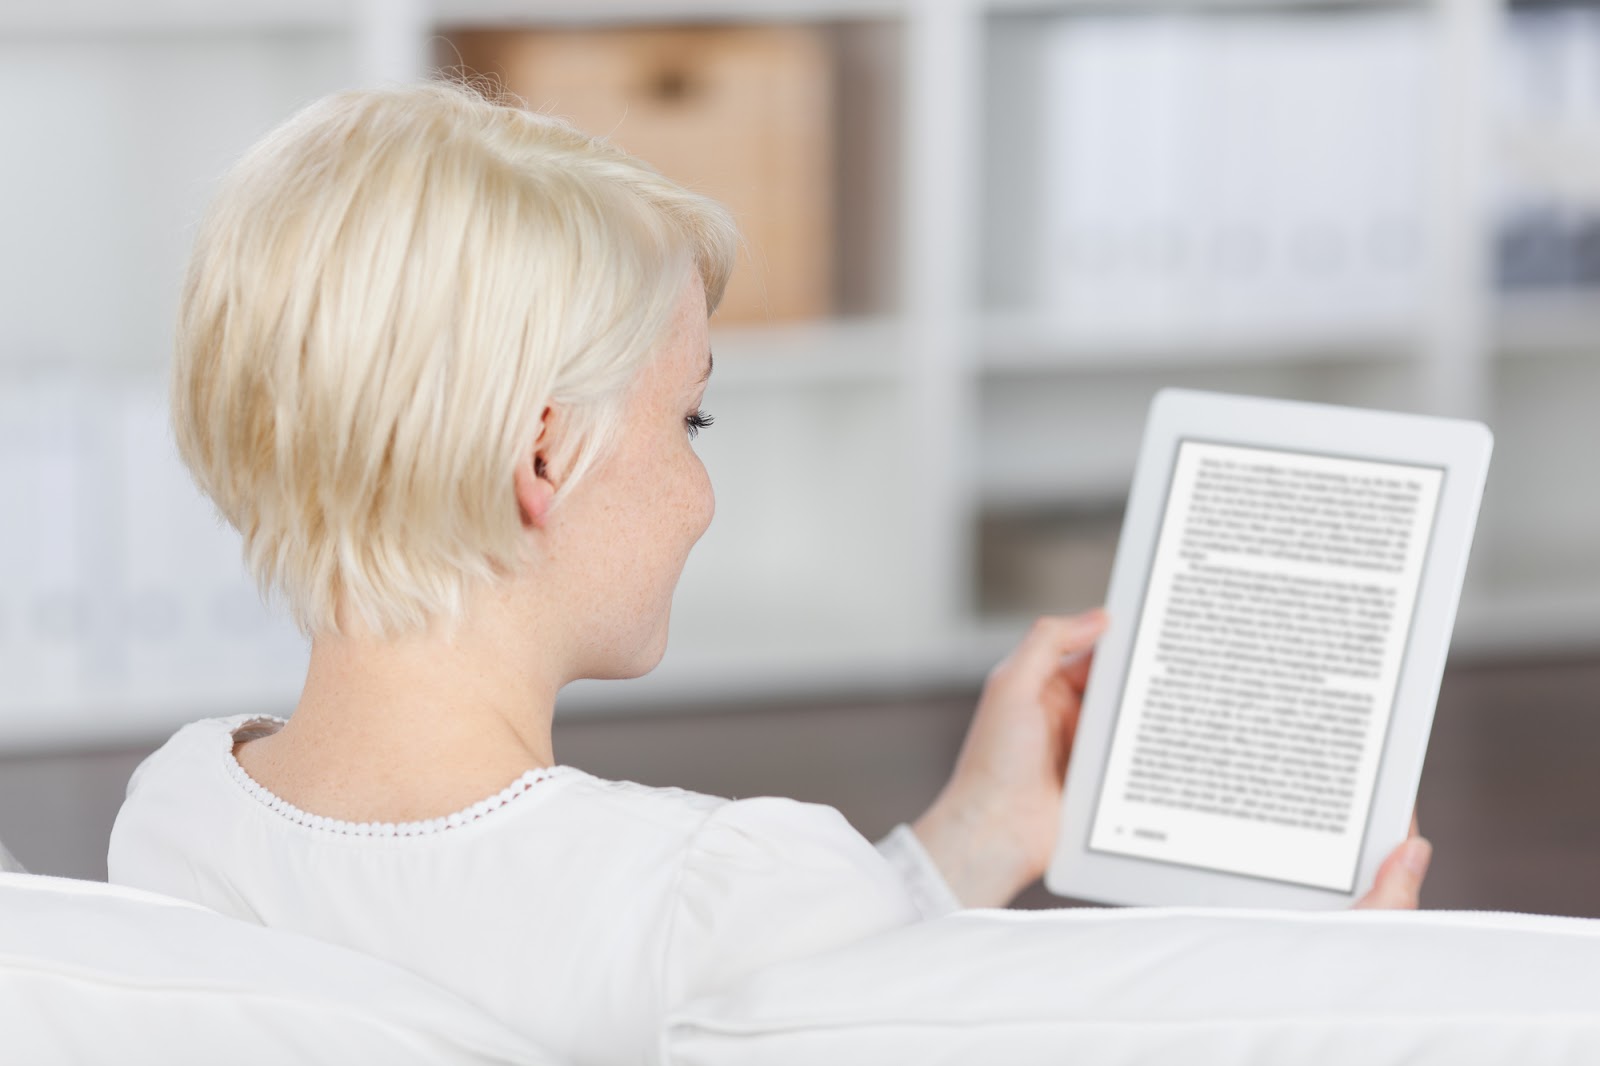 EVERYTHING YOU NEED TO KNOW ABOUT KINDLE UNLIMITED (KU)